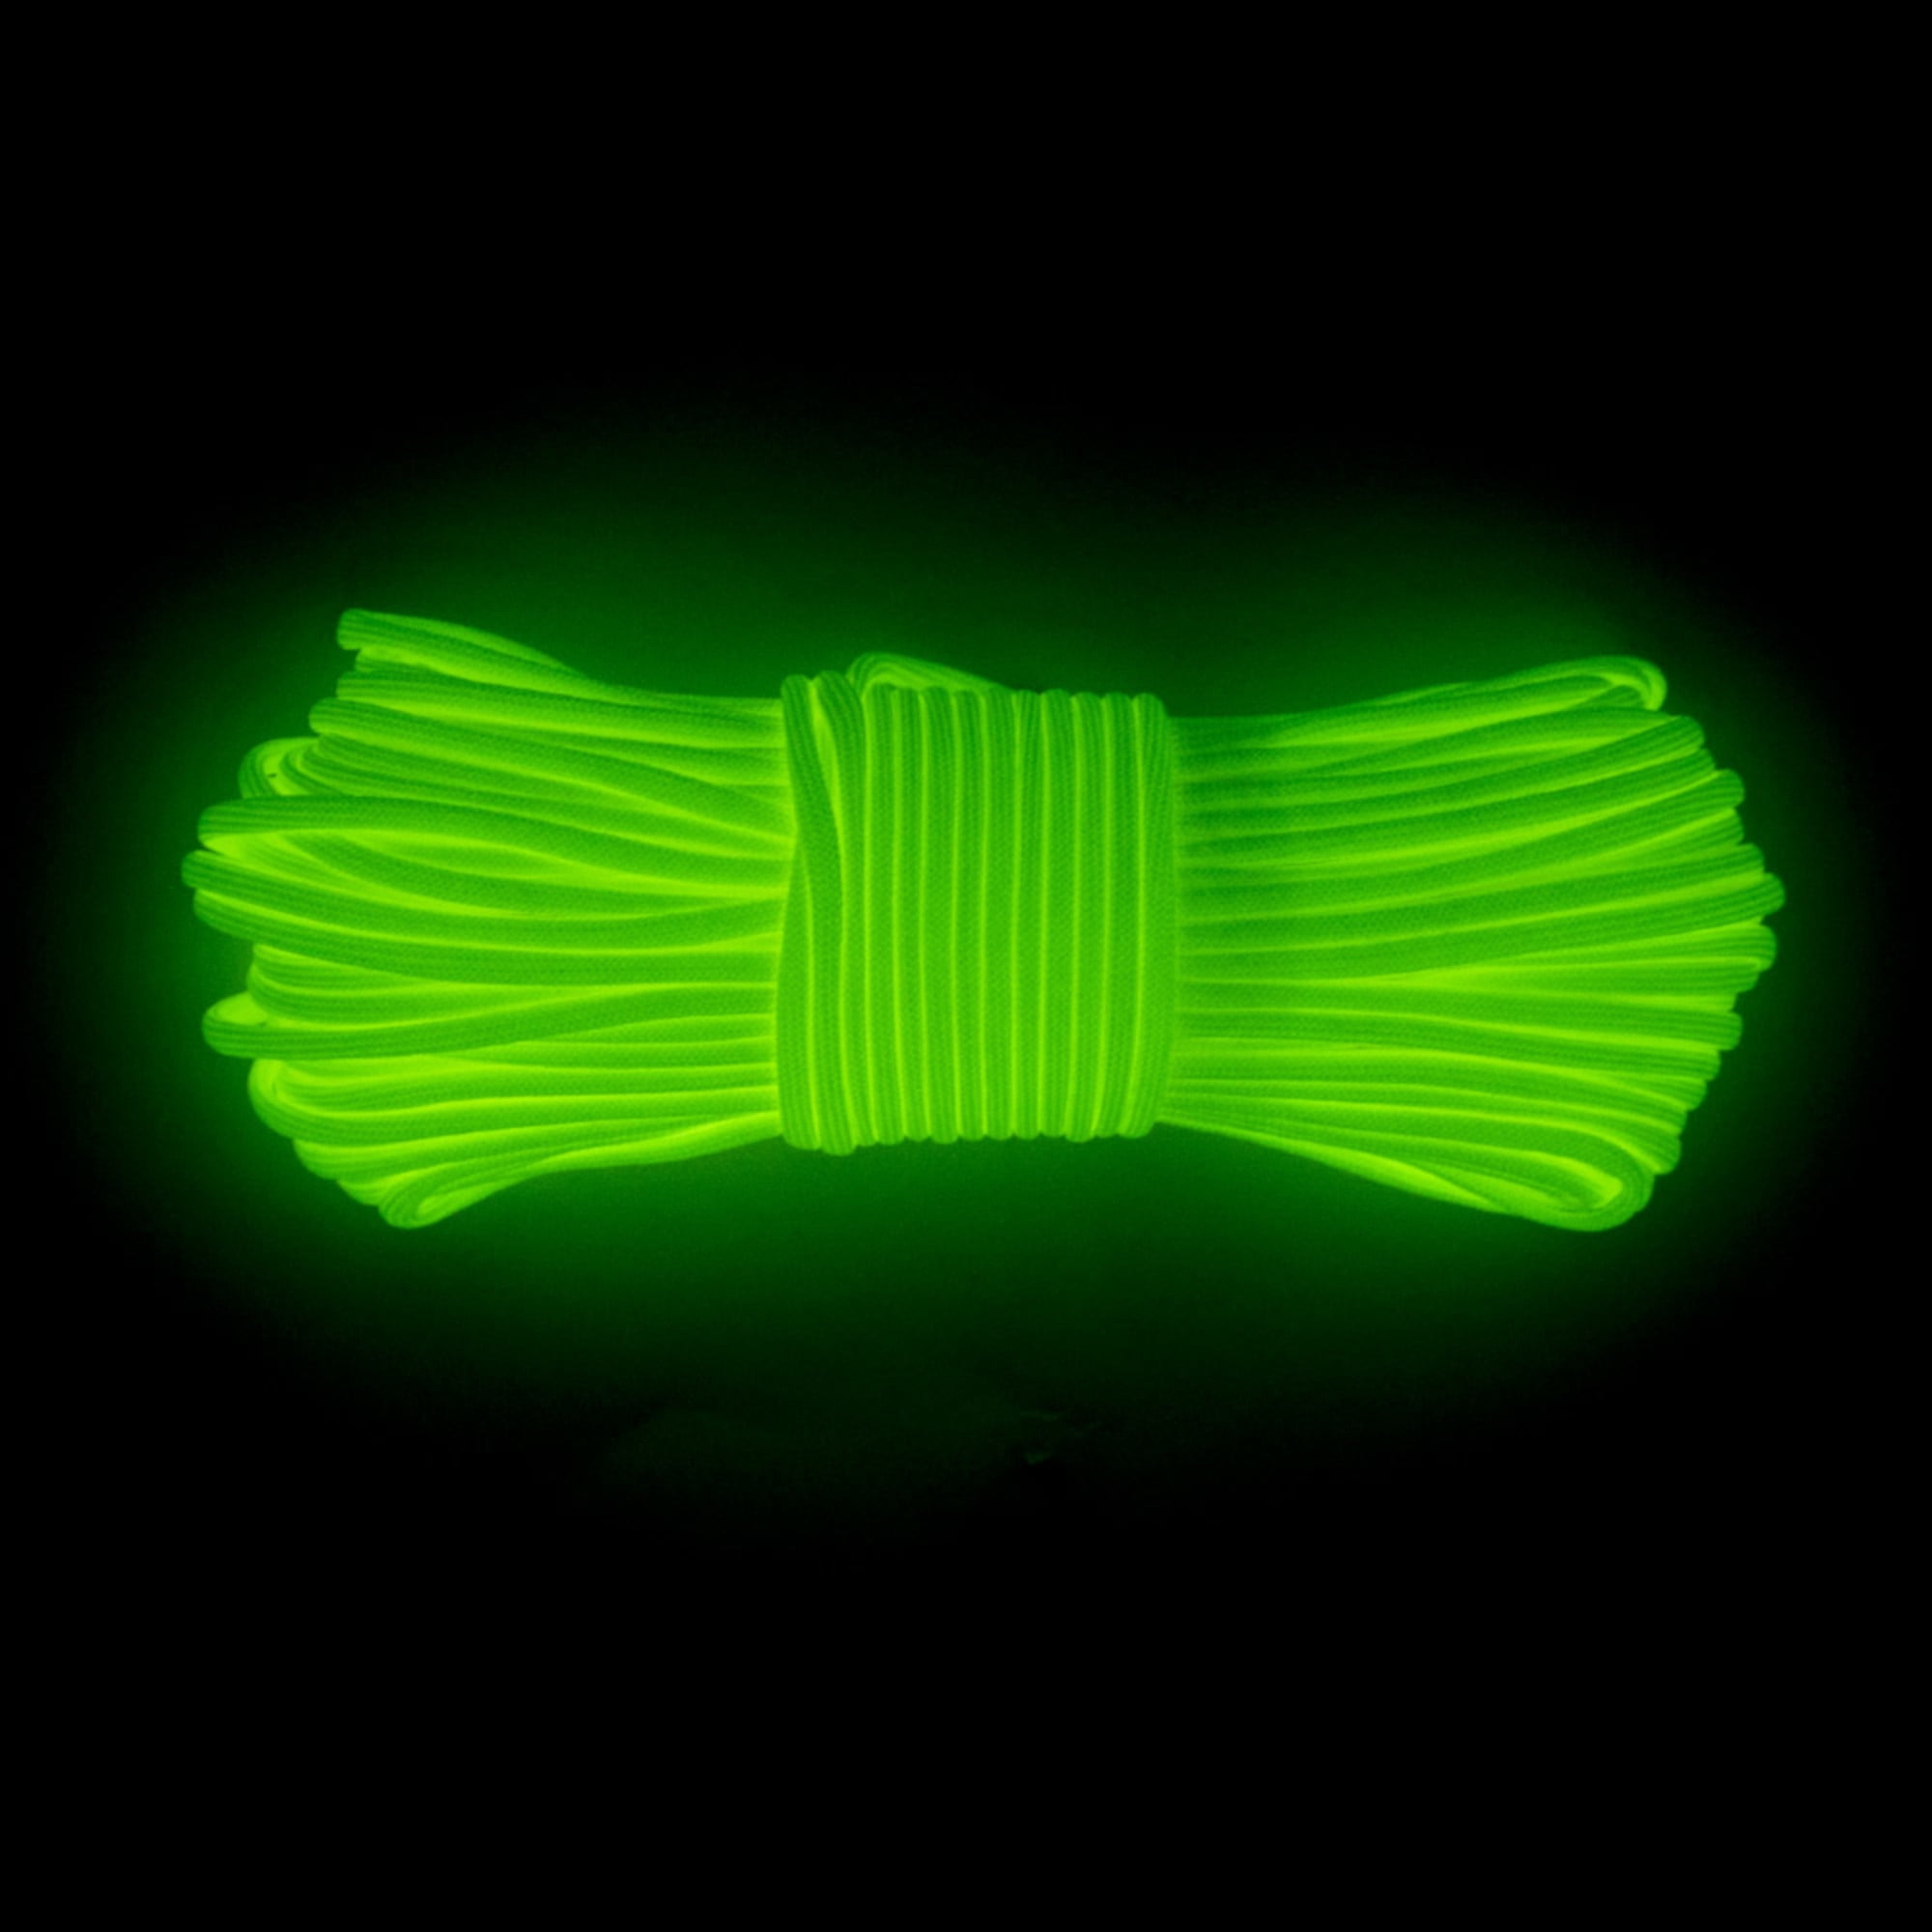 West Coast Paracord Luminous Type III Strand Nylon Glow in the Dark 550  Paracord (Parachute Cord) Rope 10', 25', 50', 100' Hanks  1000' Spools  Multiple Colors